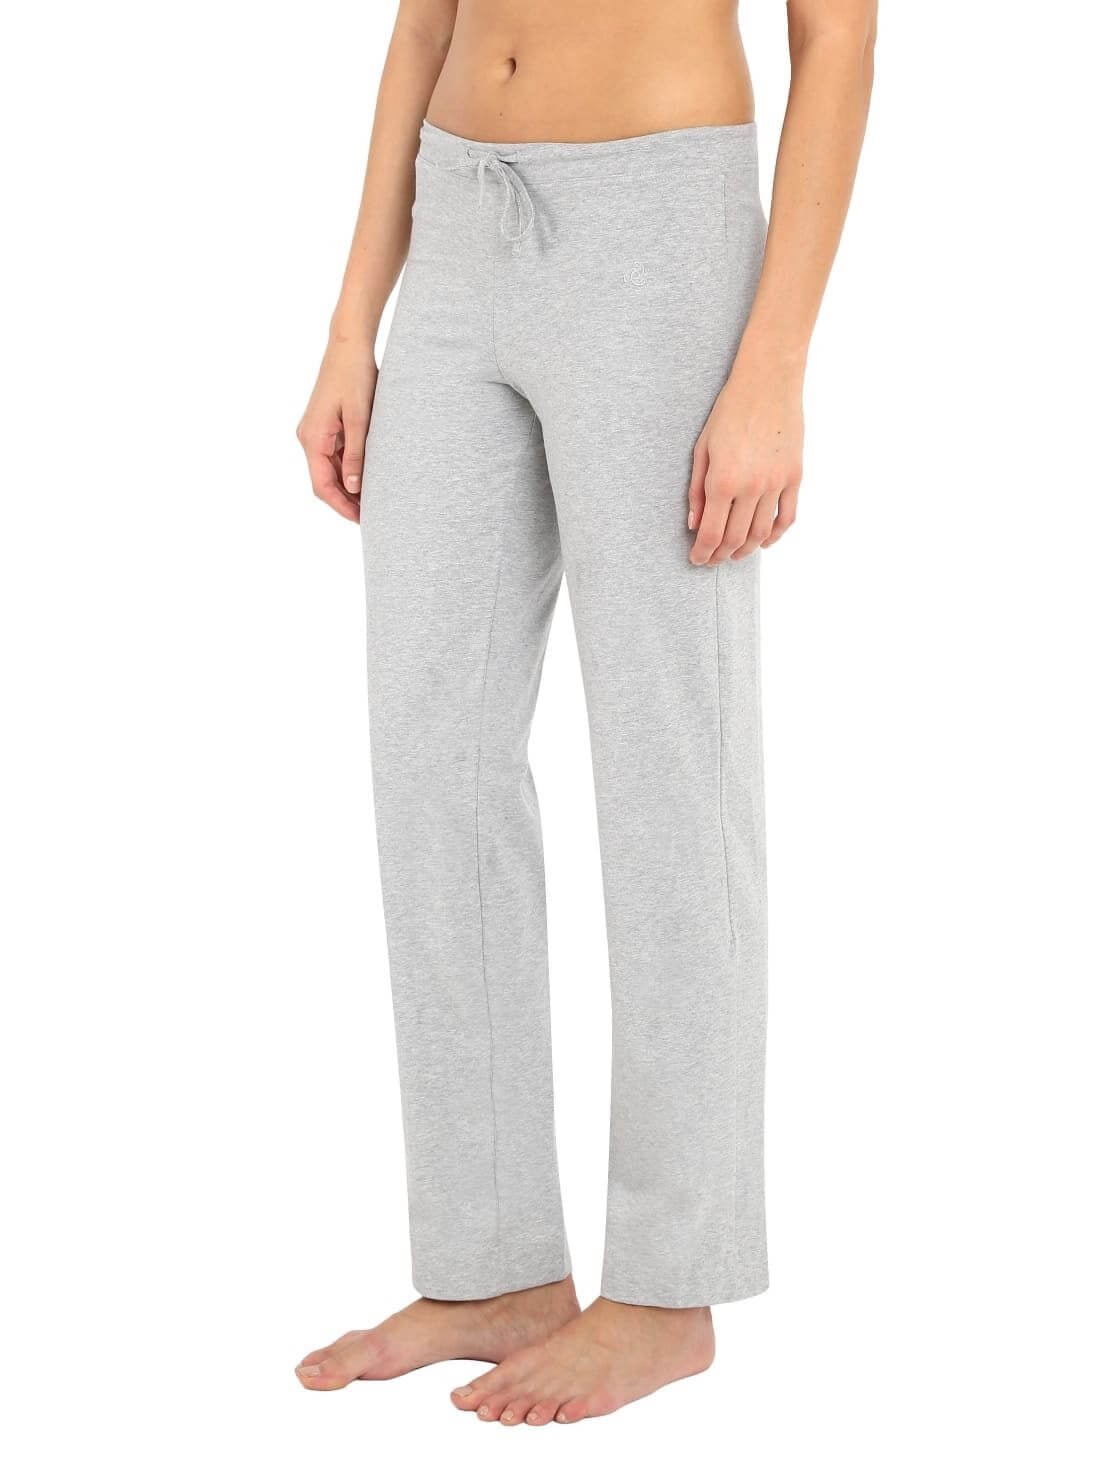 Enamor Womens Cotton Straight Leg Lounge Pants  Online Shopping site in  India